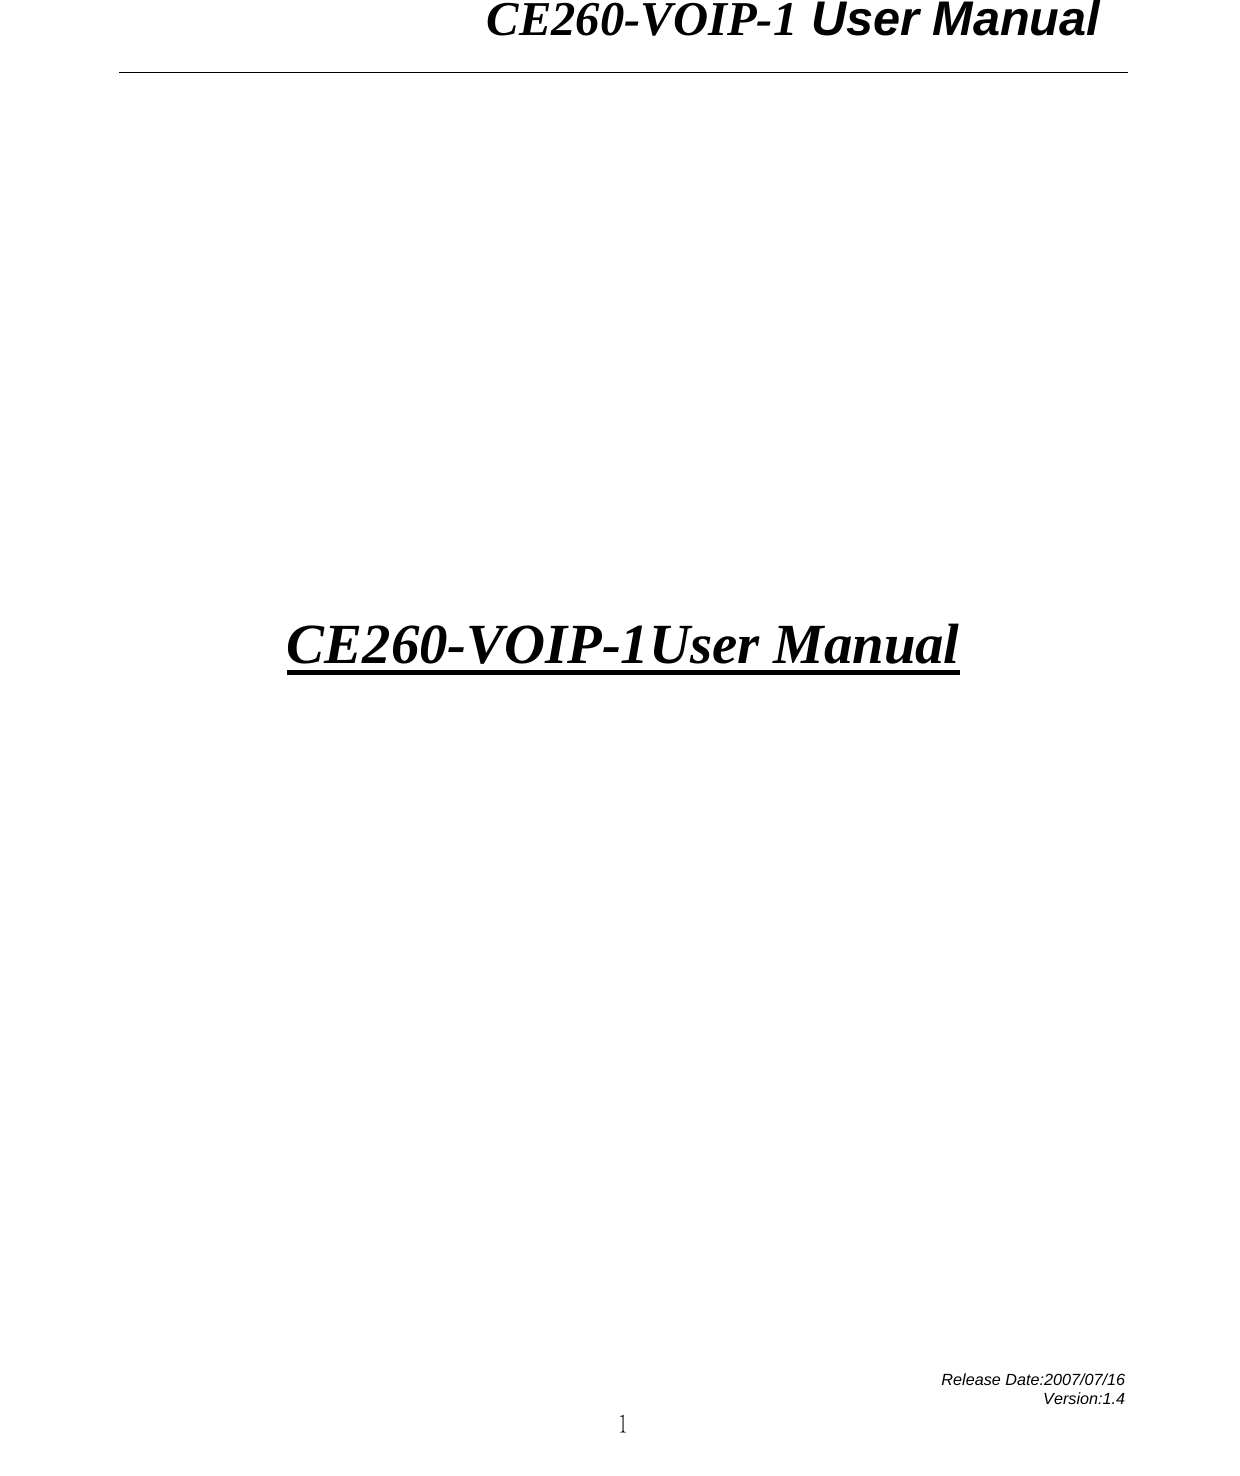                CE260-VOIP-1 User Manual   Release Date:2007/07/16 Version:1.4 1      CE260-VOIP-1User Manual        